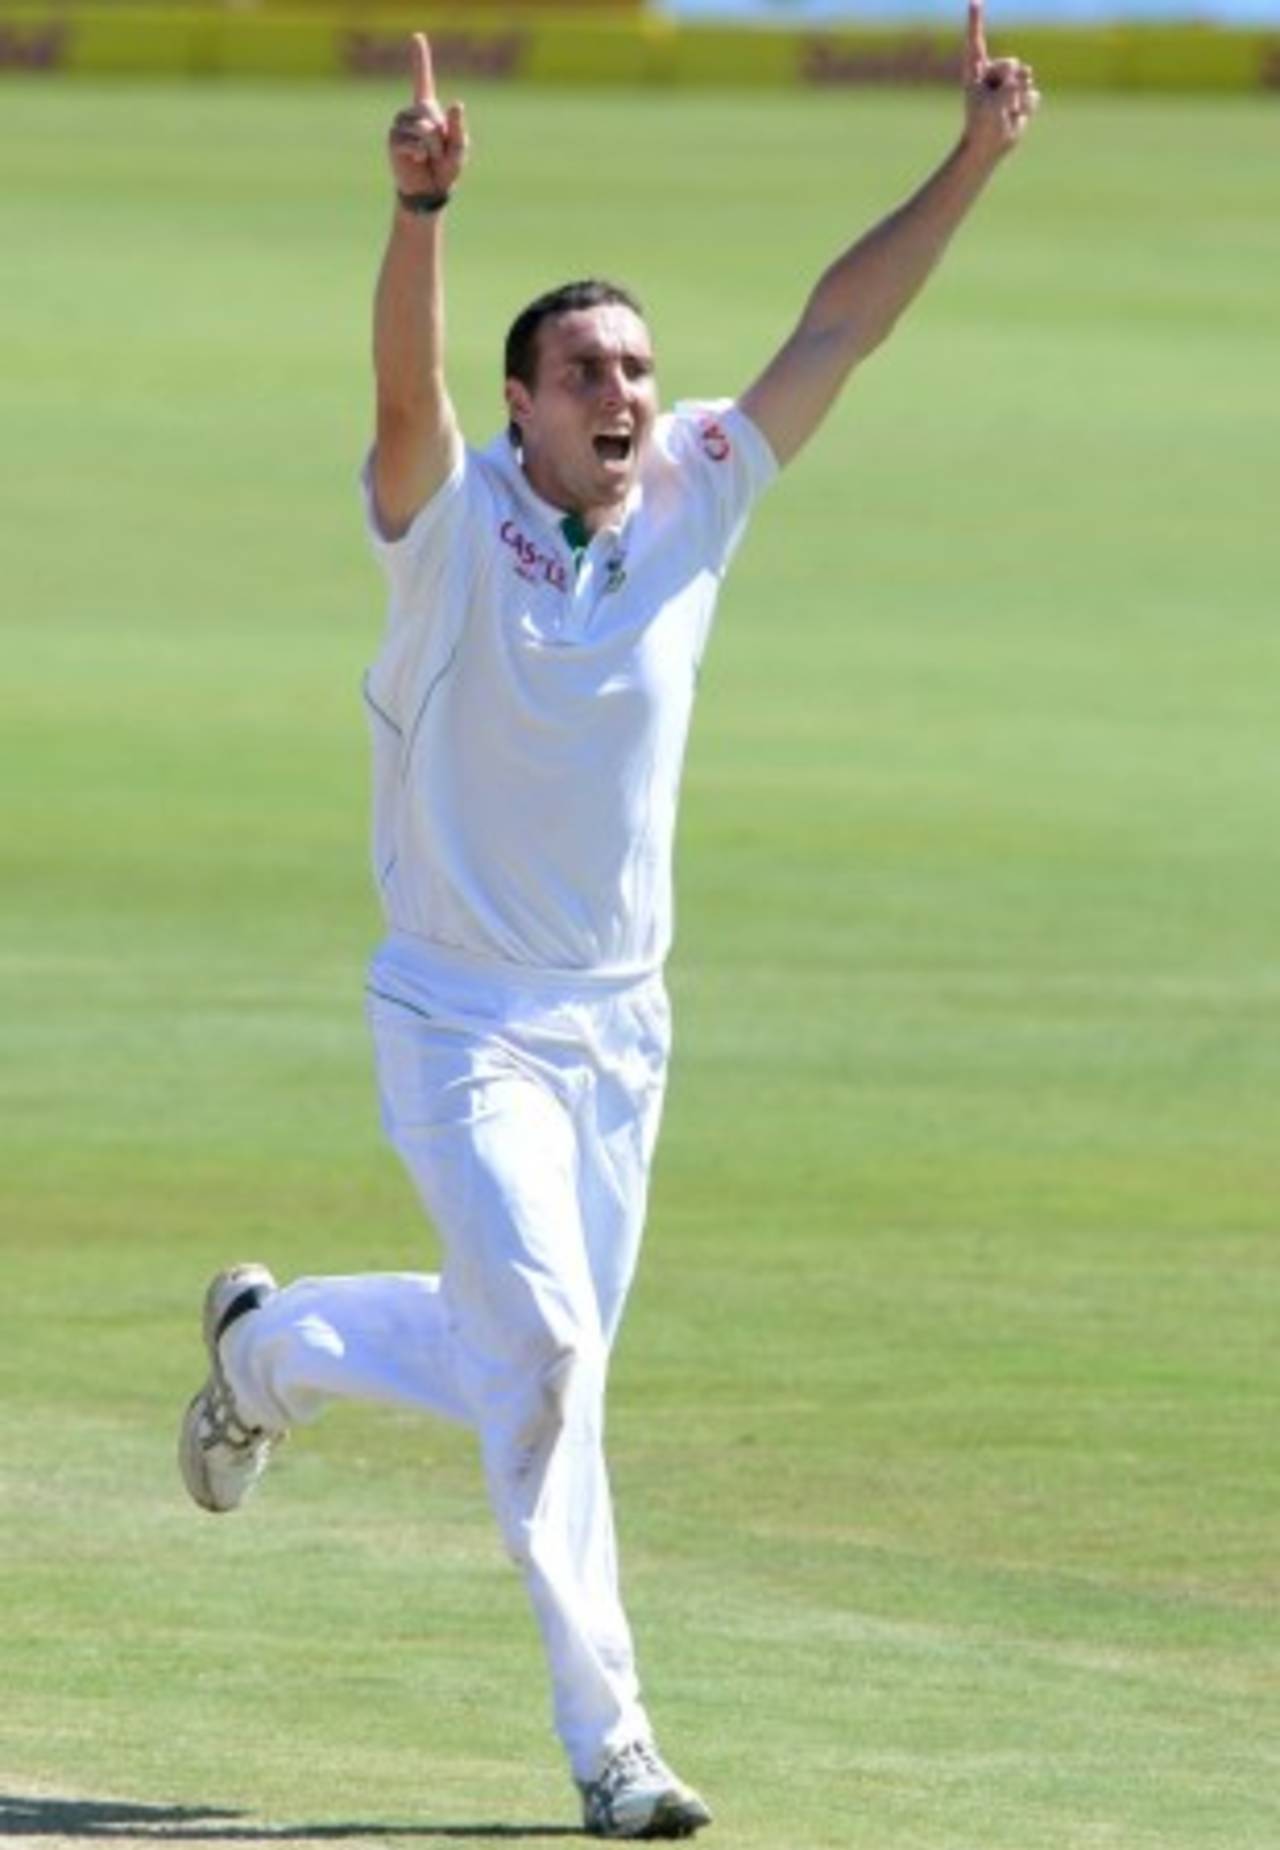 Breeding monsters: Kyle Abbott, the latest fast bowler off the South African production line, feasted on uncertain Pakistan batting,&nbsp;&nbsp;&bull;&nbsp;&nbsp;Getty Images